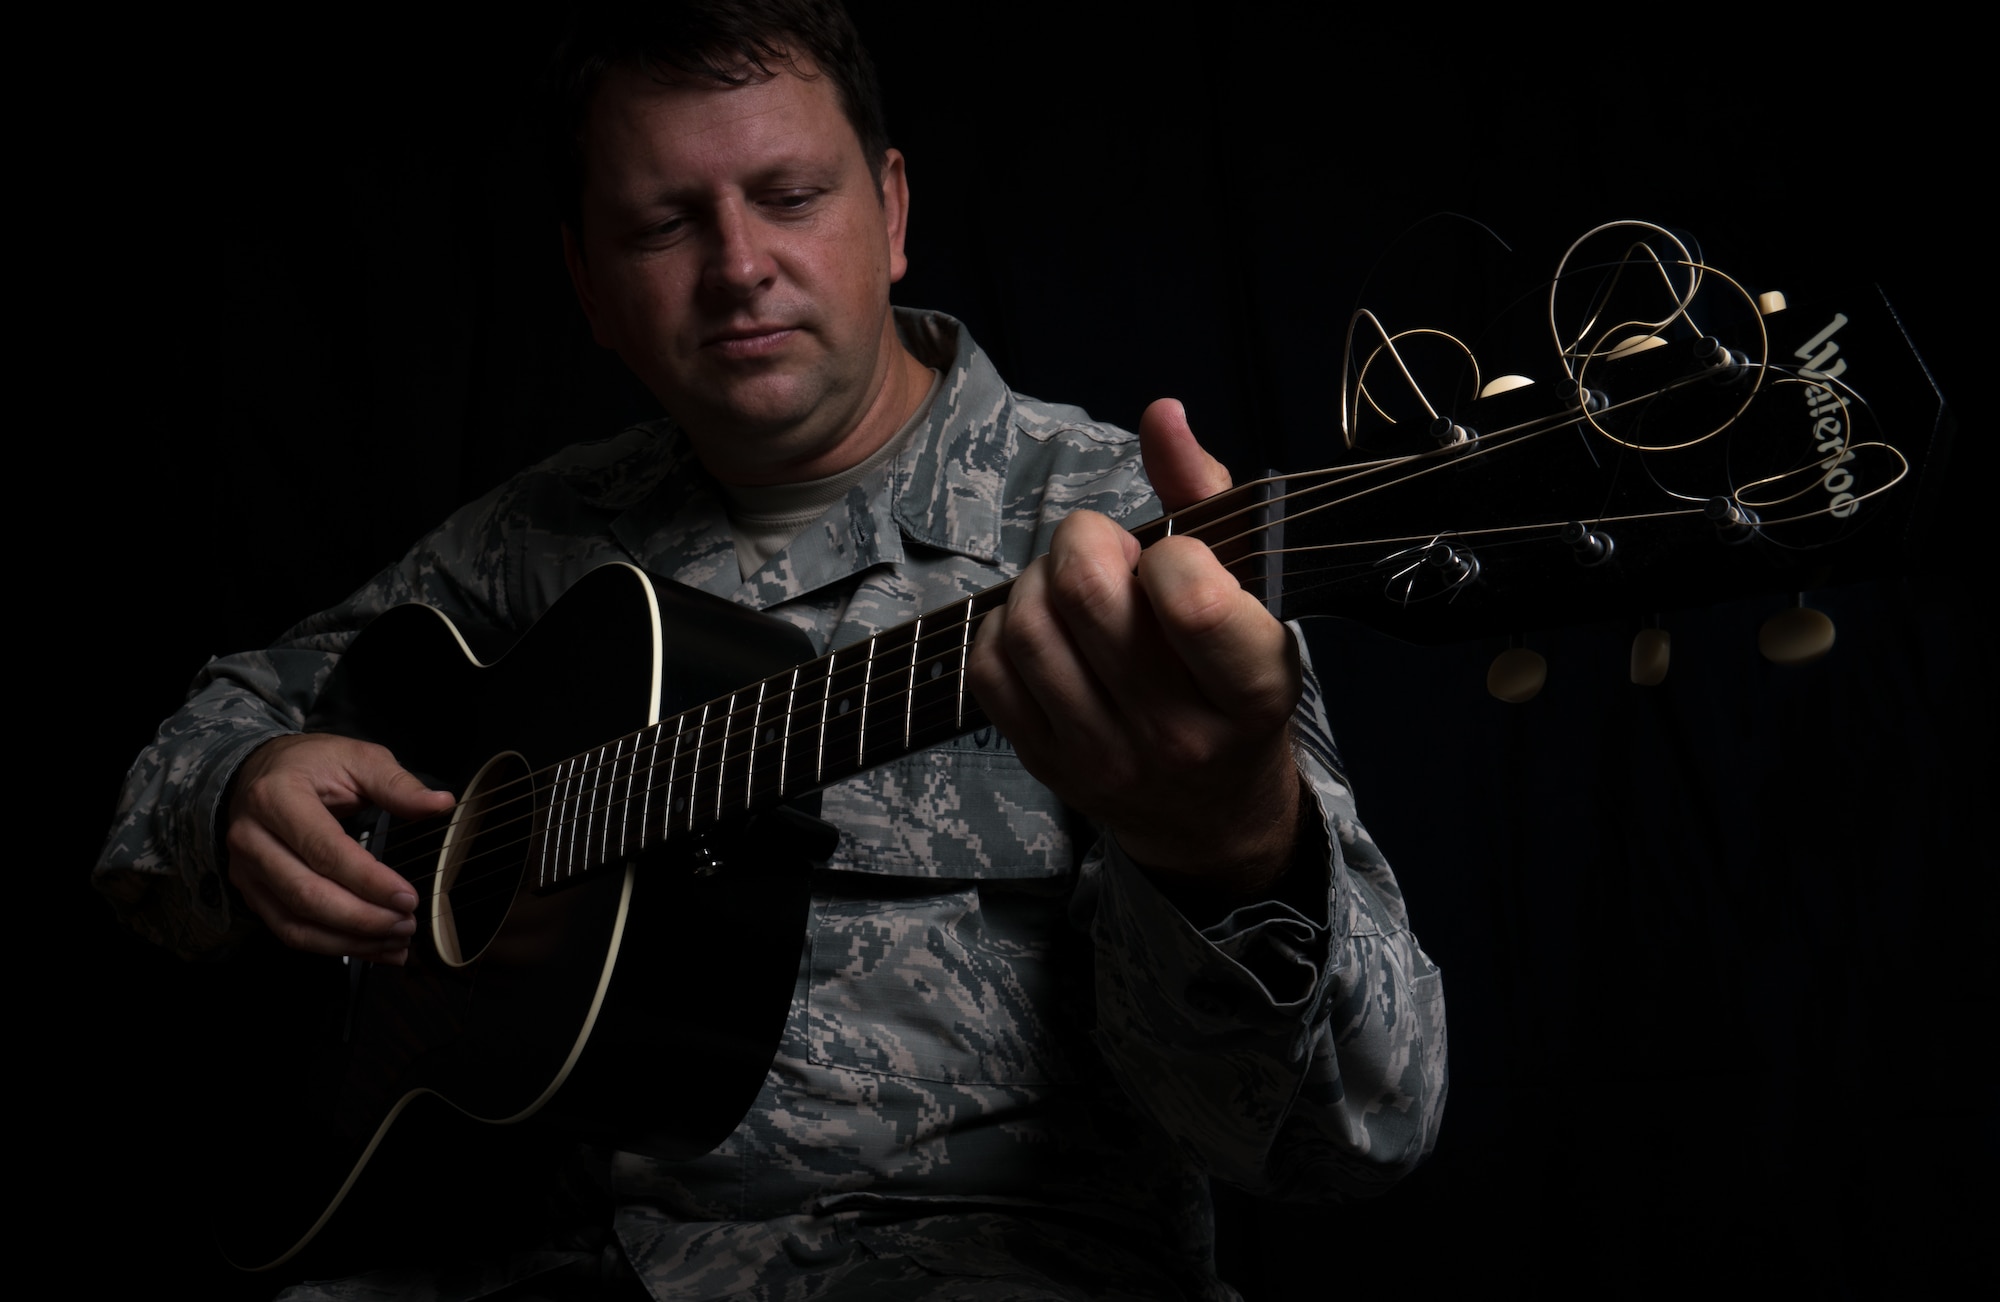 Tech. Sgt. Abraham Partridge, a 403rd Maintenance Squadron intergraded missions systems technician, poses for a portrait with his guitar at Keesler Air Force Base, Mississippi. Partridge’s performs Folk music paints Folk art. (U.S. Air Force photo by Staff Sgt. Shelton Sherrill)